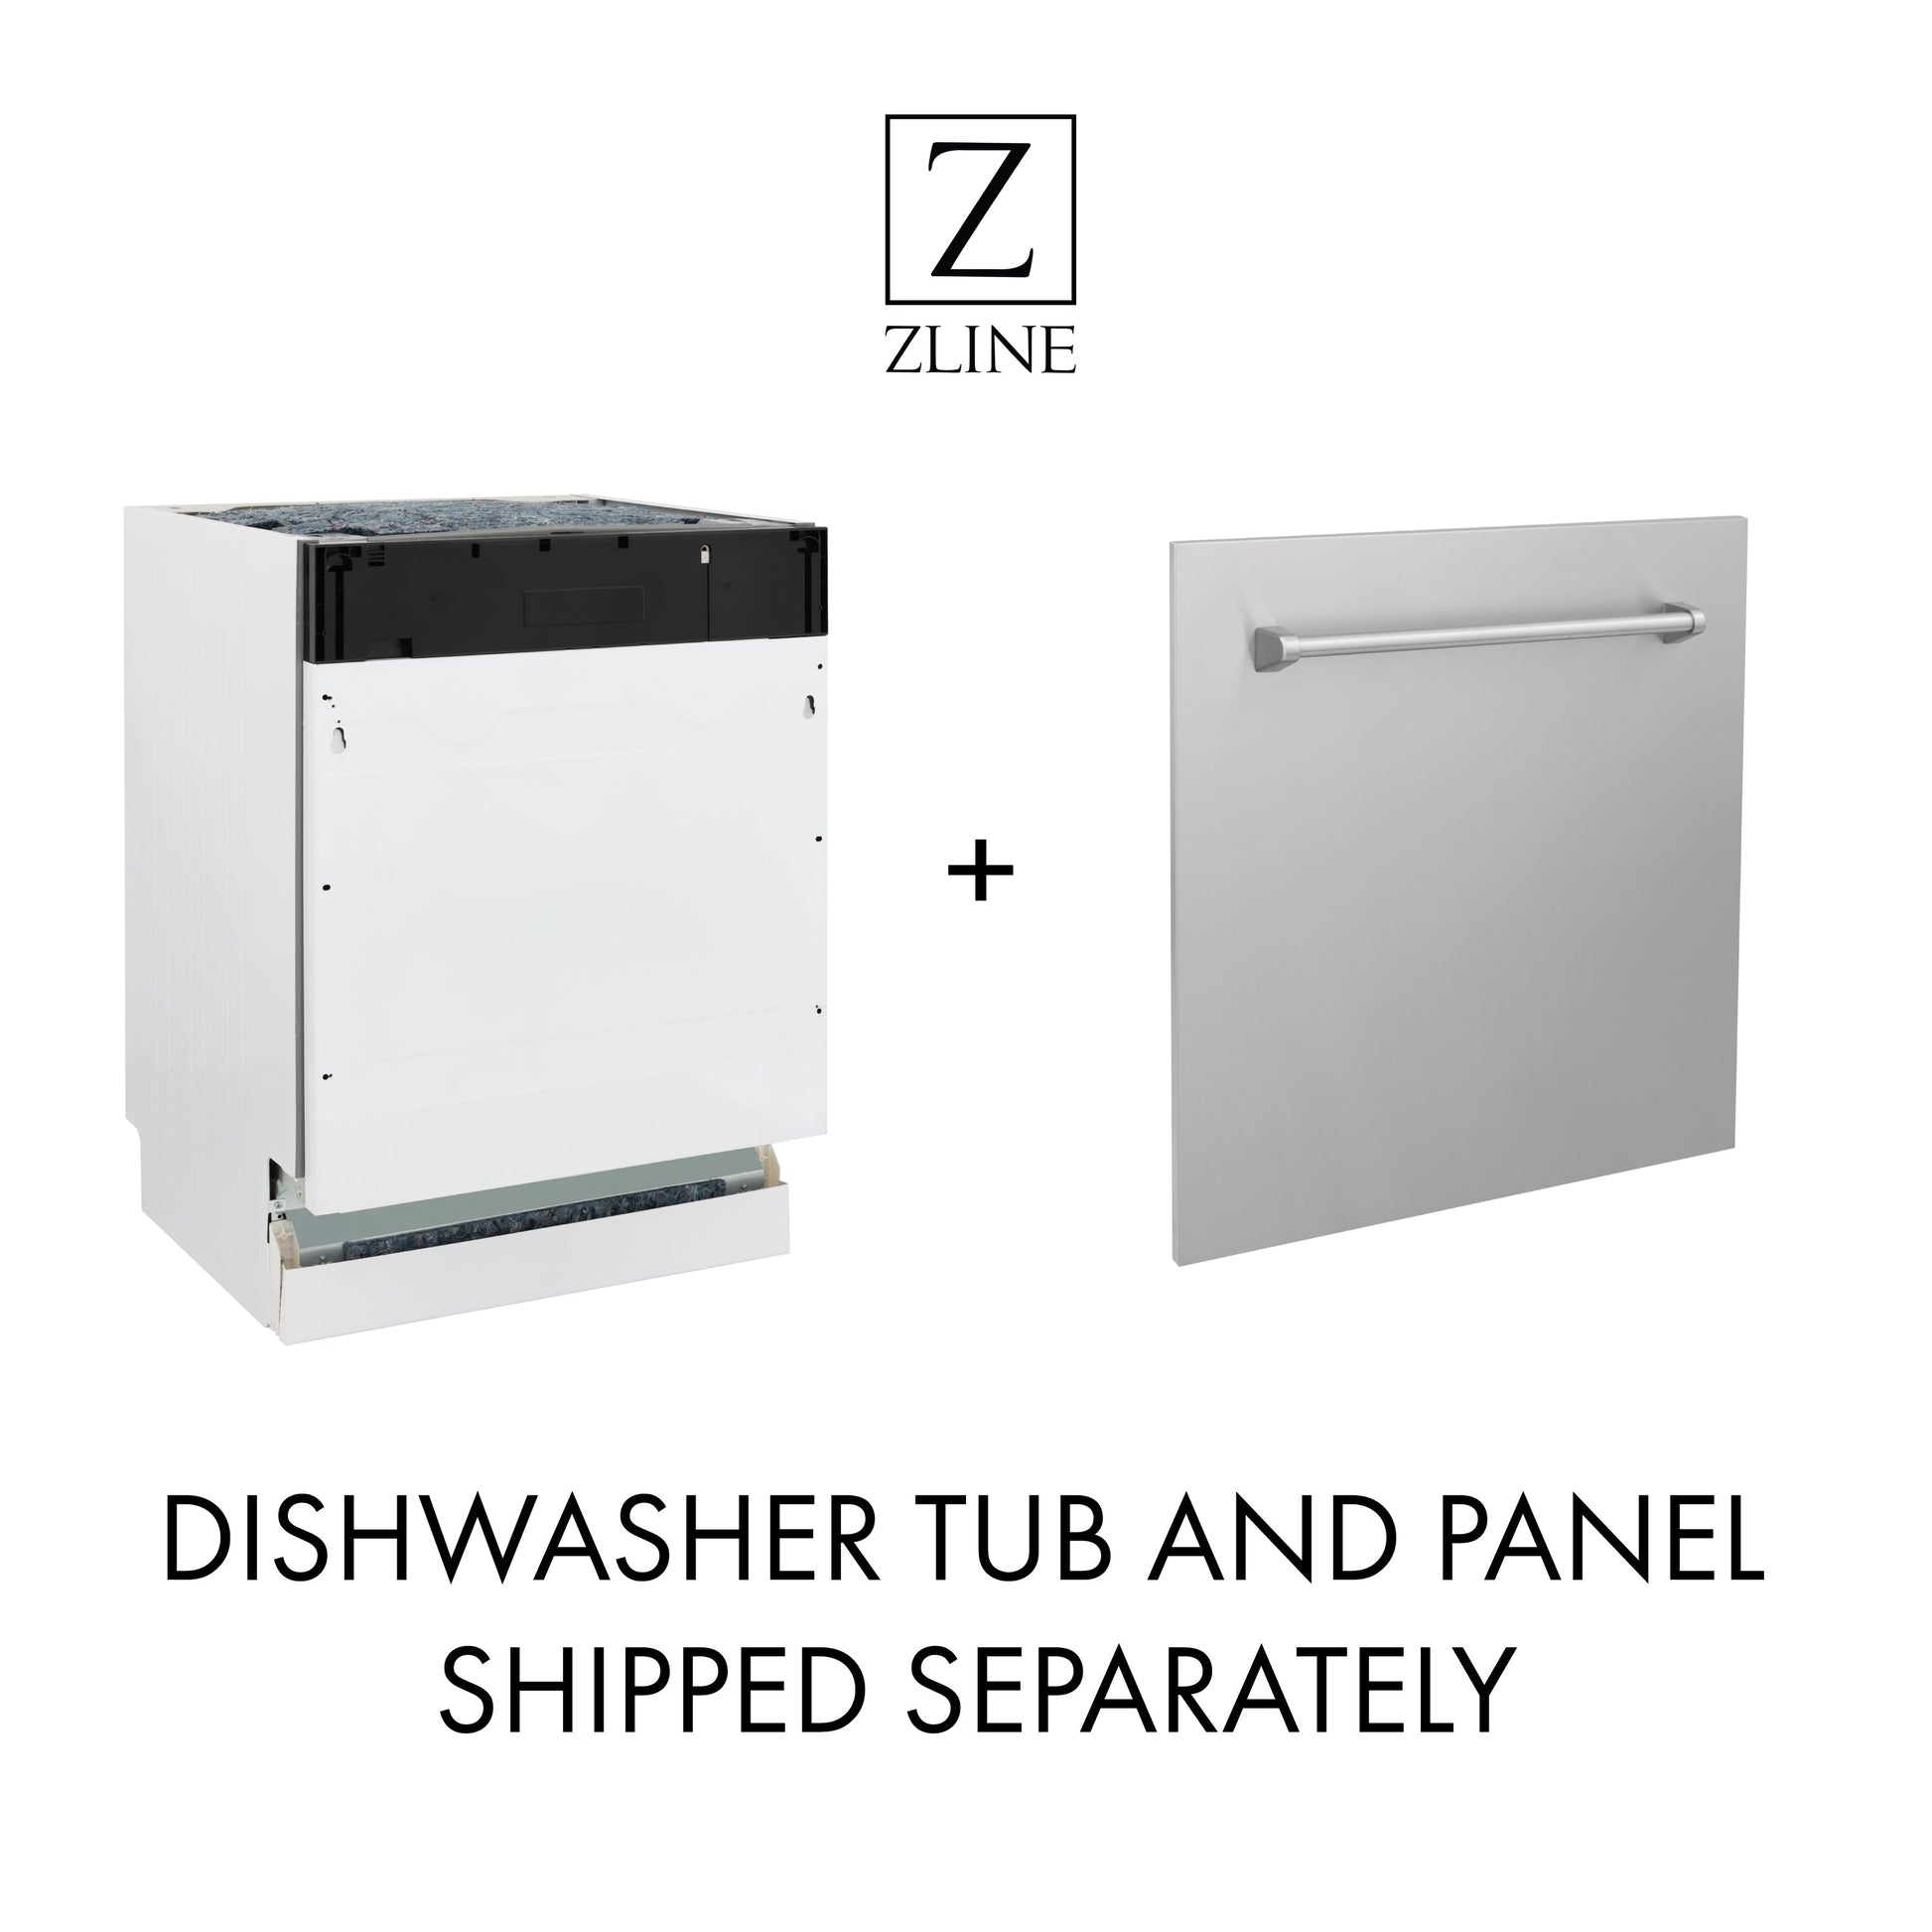 ZLINE Dishwasher Tub and Panel Will Be Shipped Separately